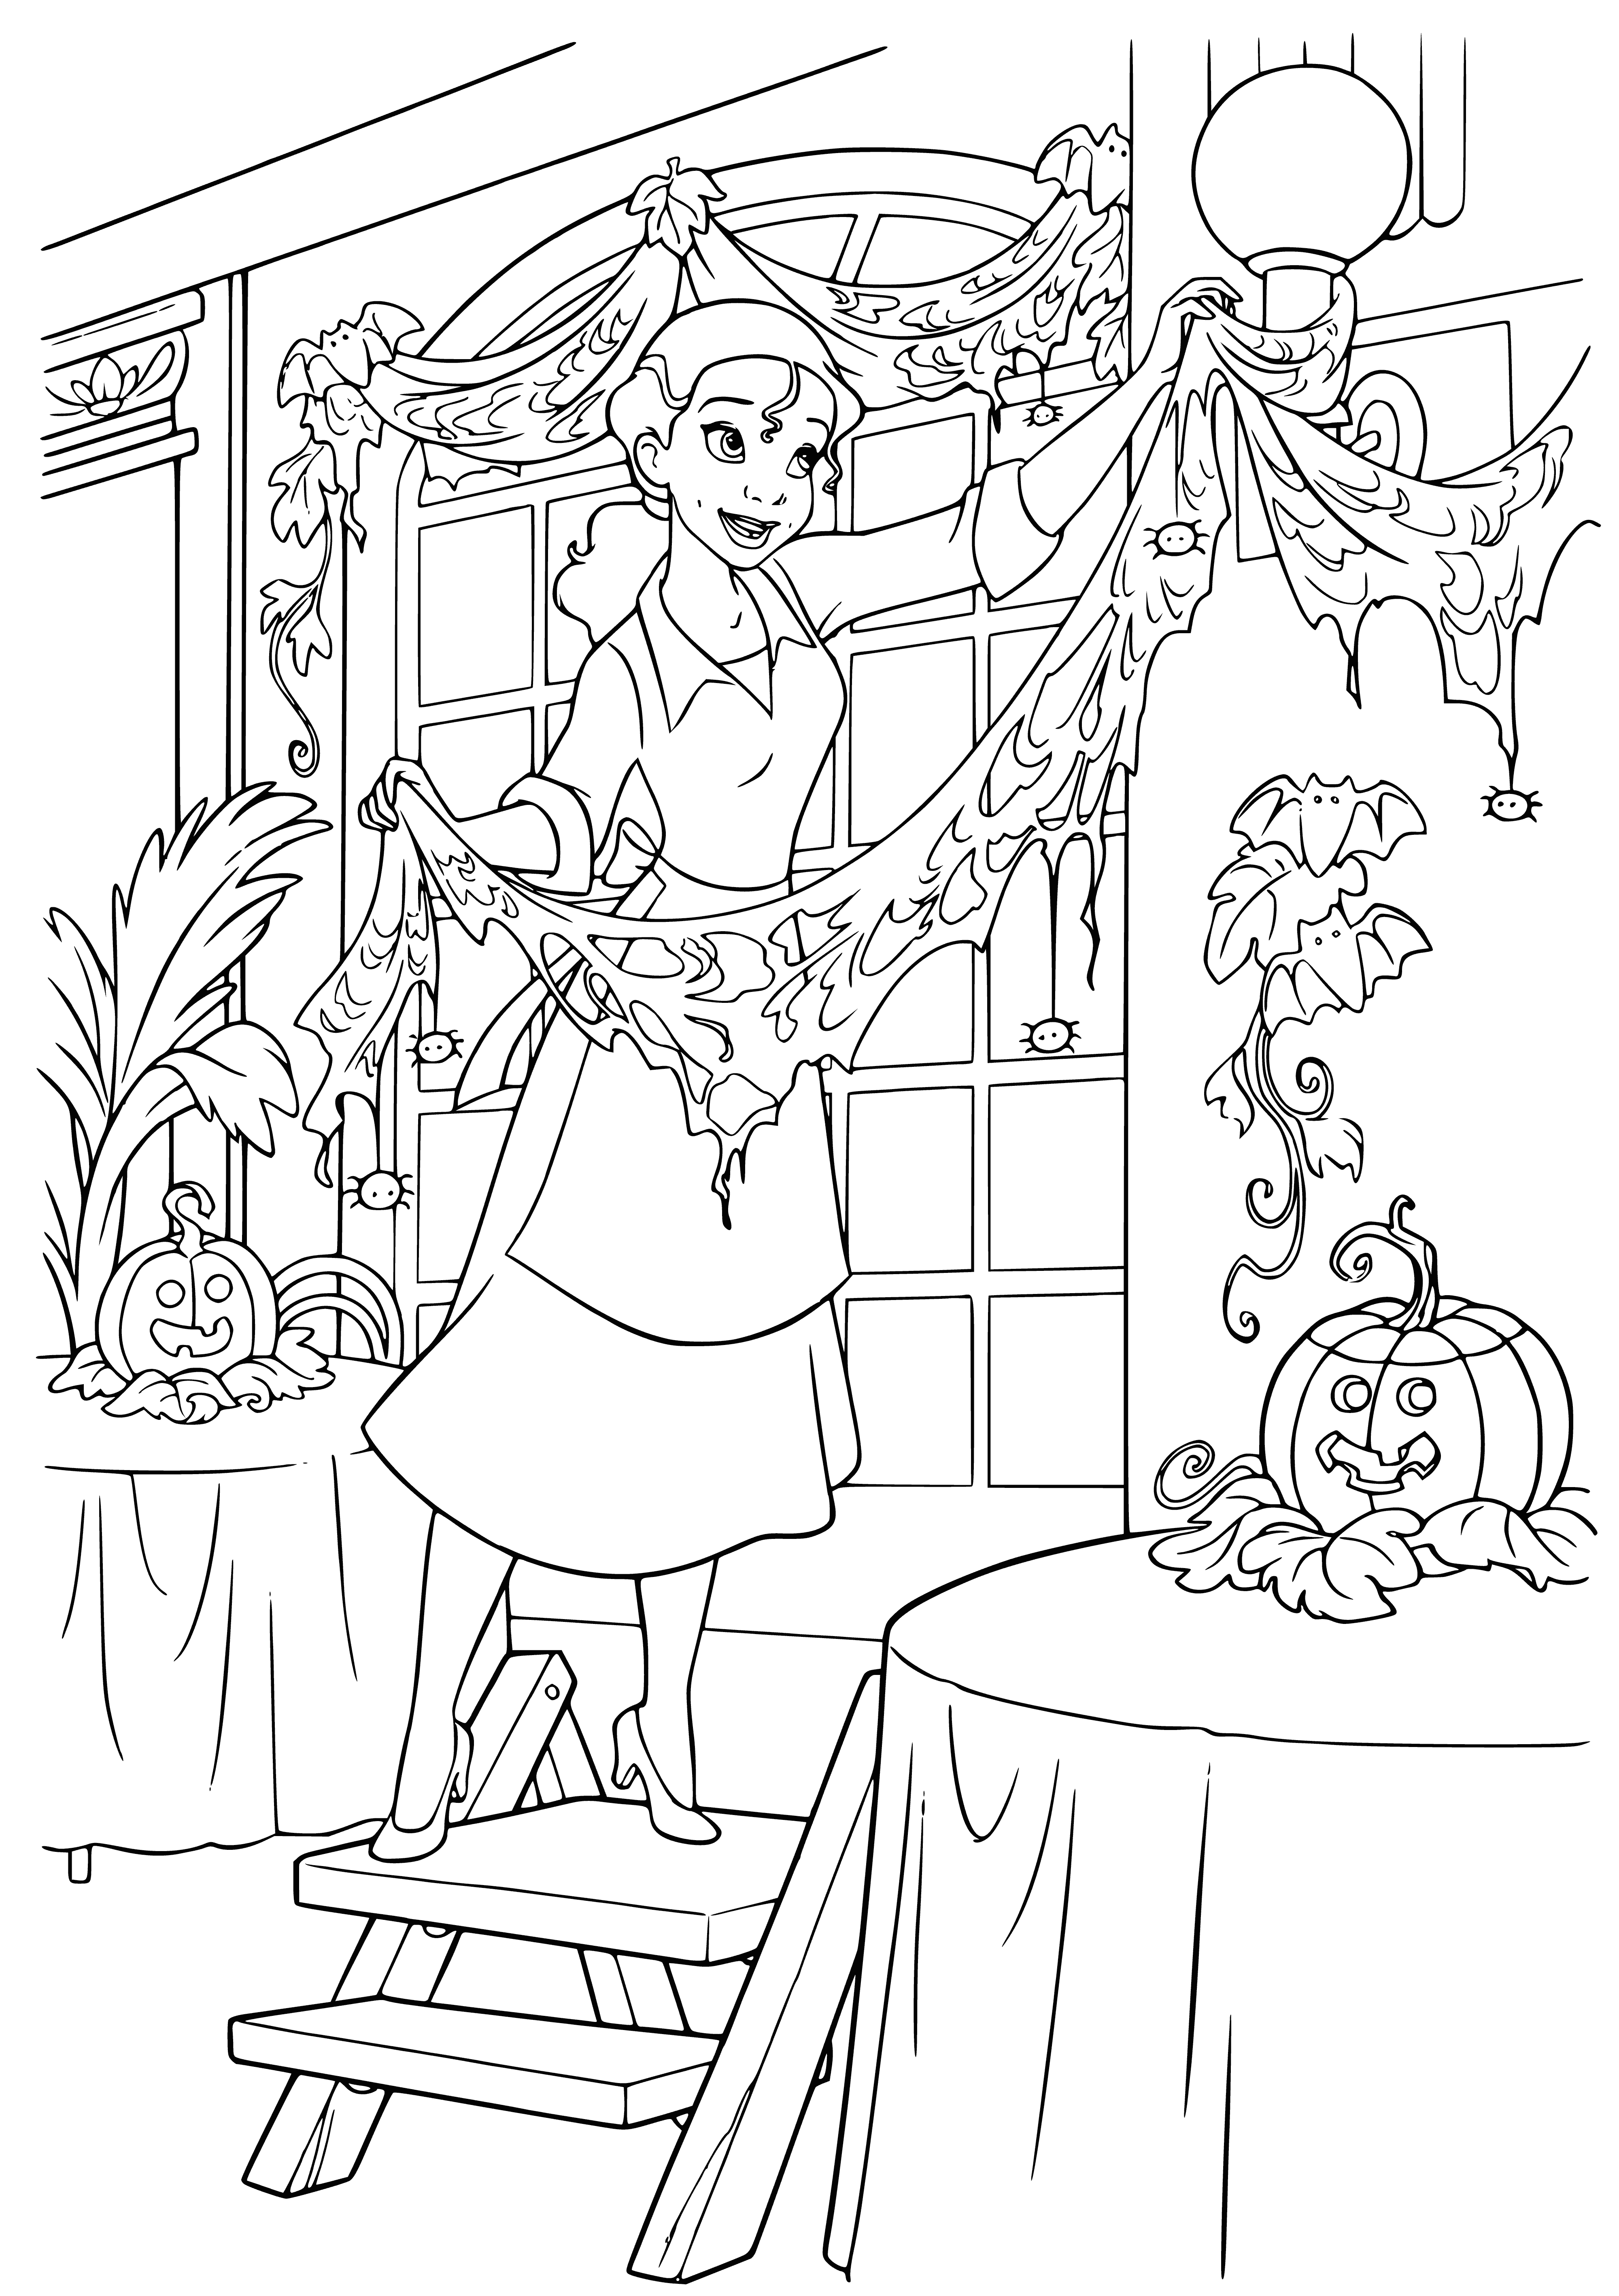 Diana getting ready for Halloween coloring page